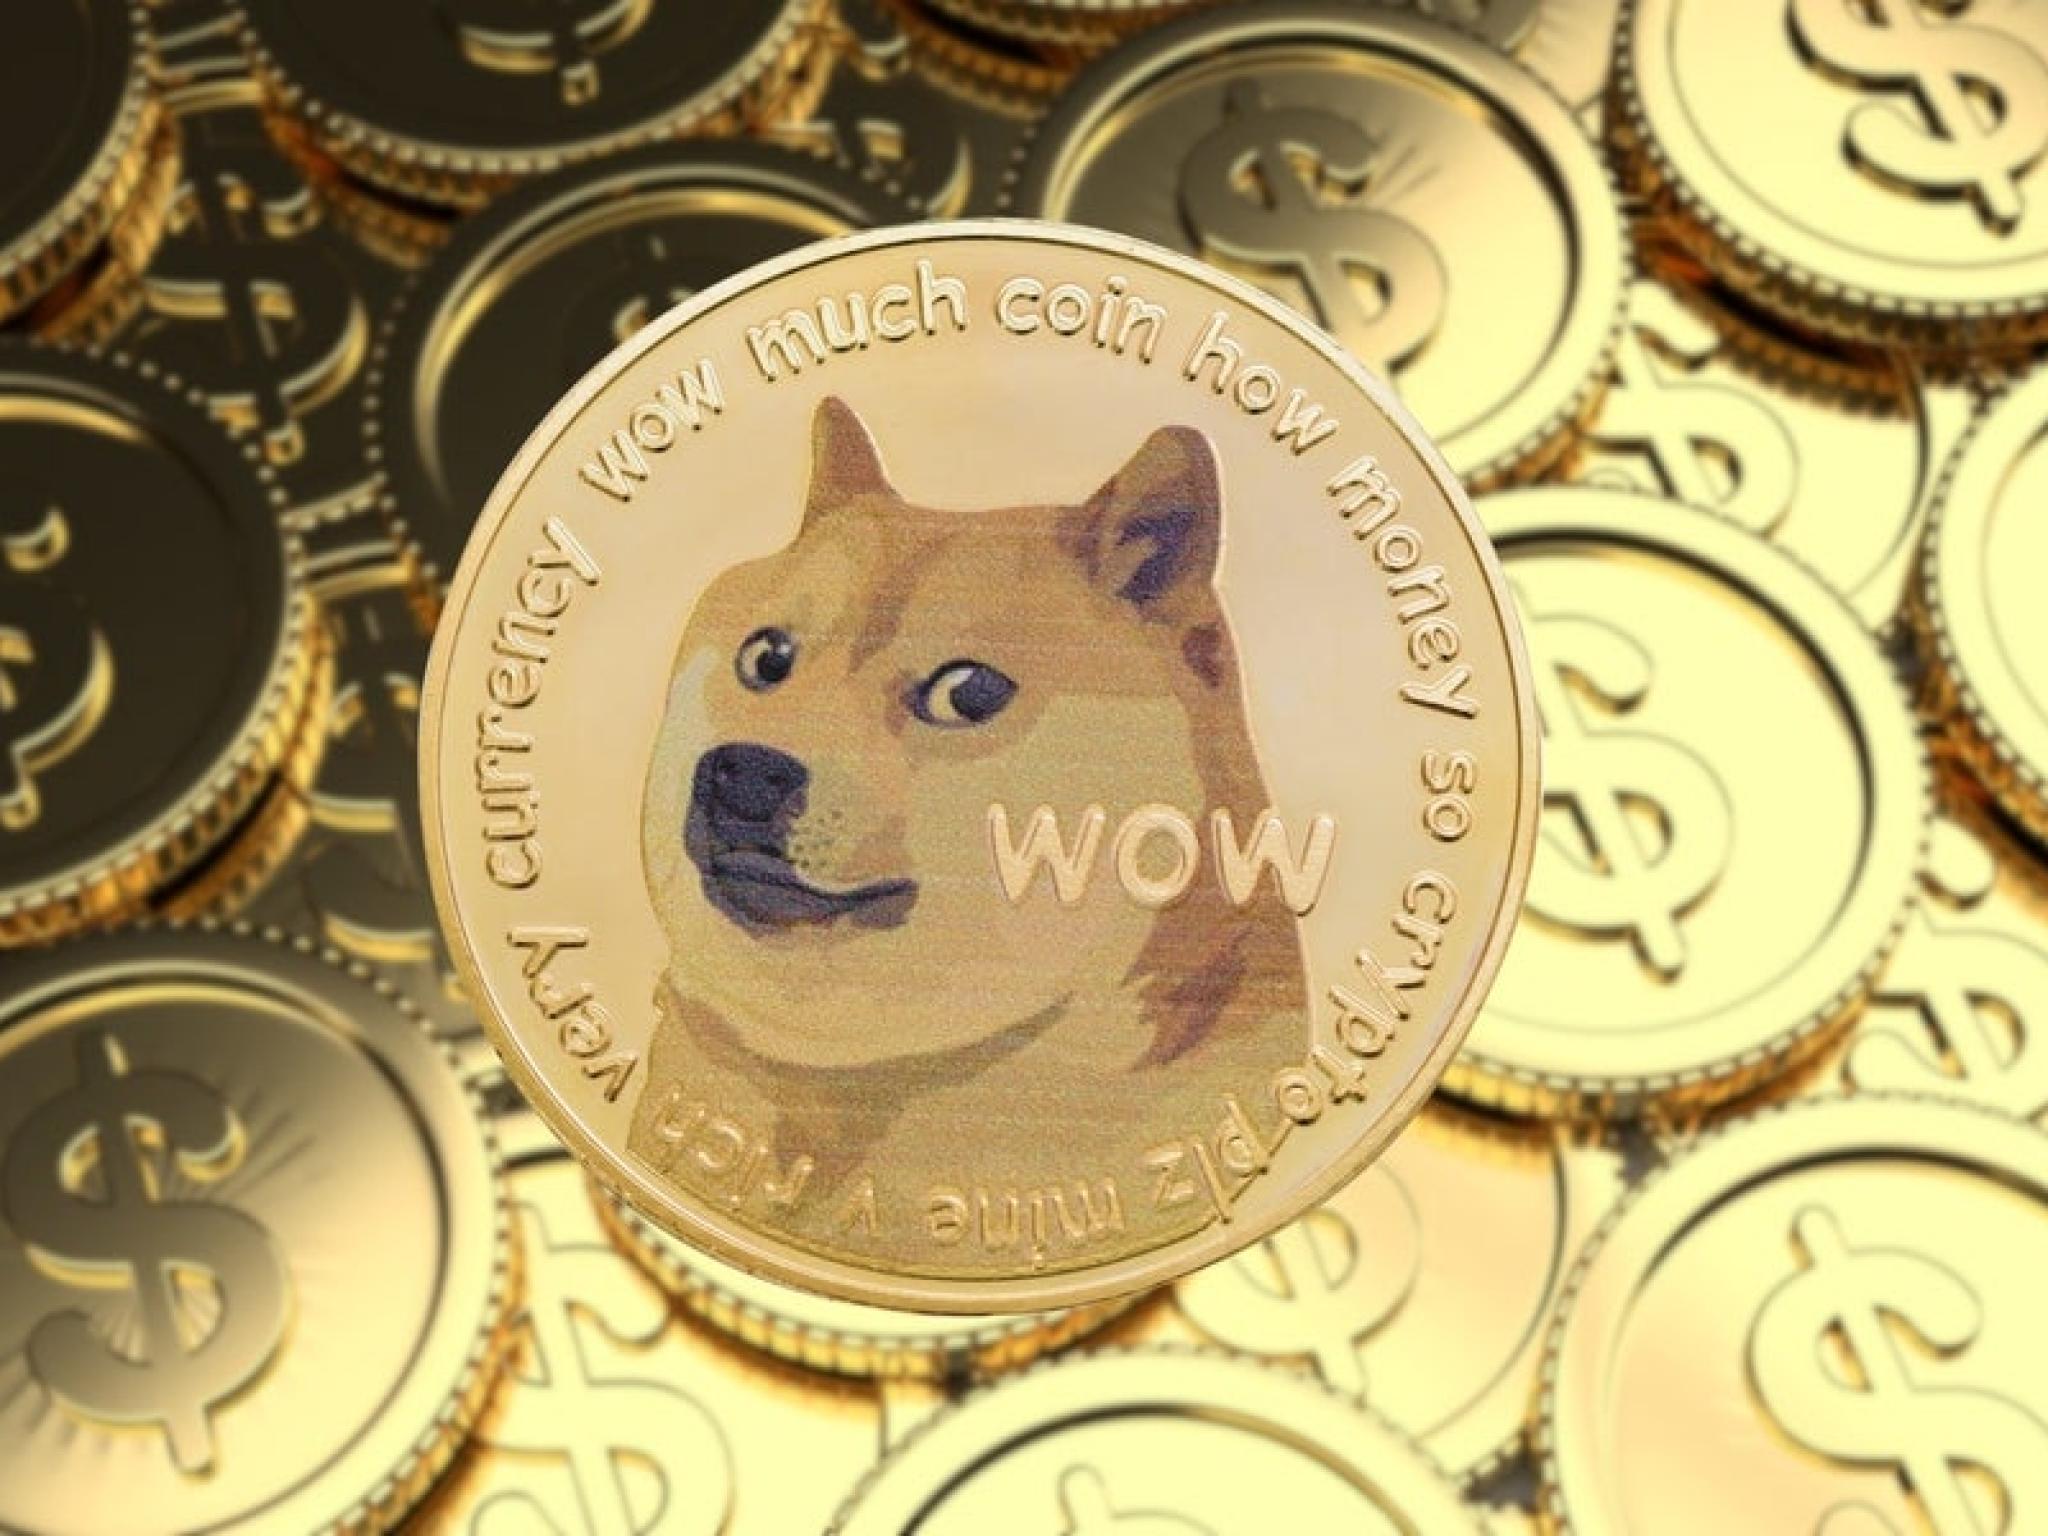  amid-dogecoin-price-dip-trader-predicts-major-support-zone-for-meme-coin 